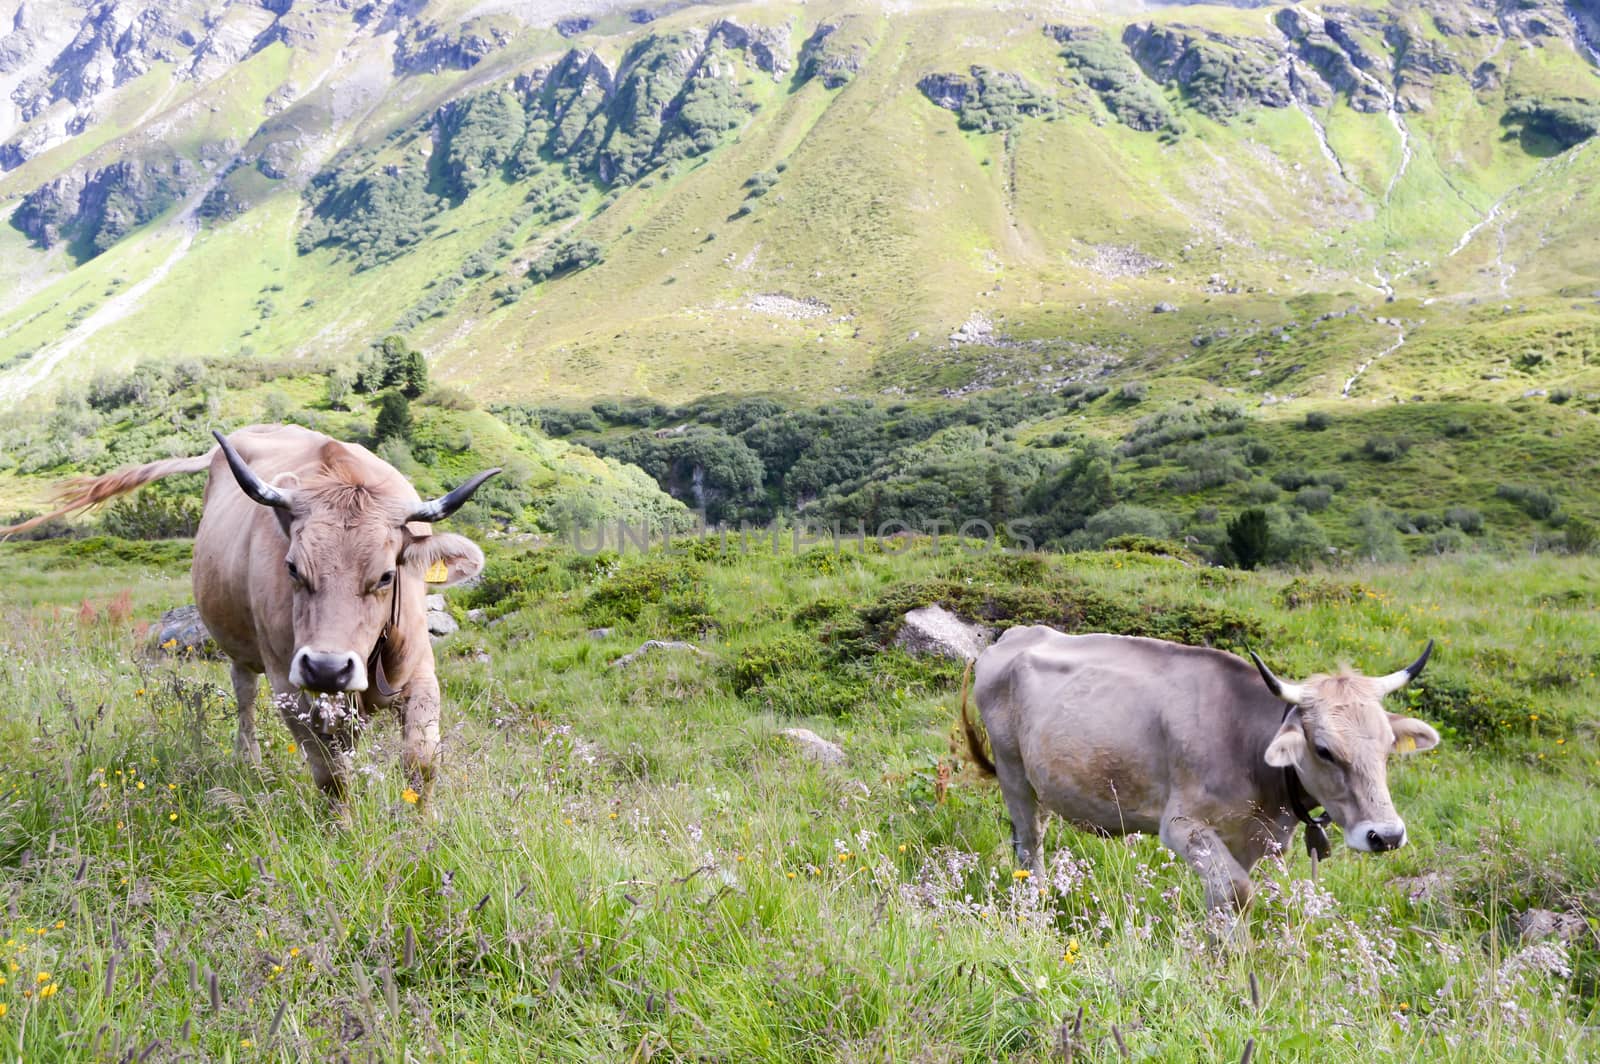 Gray cows in the tyrolean mountains in Austria